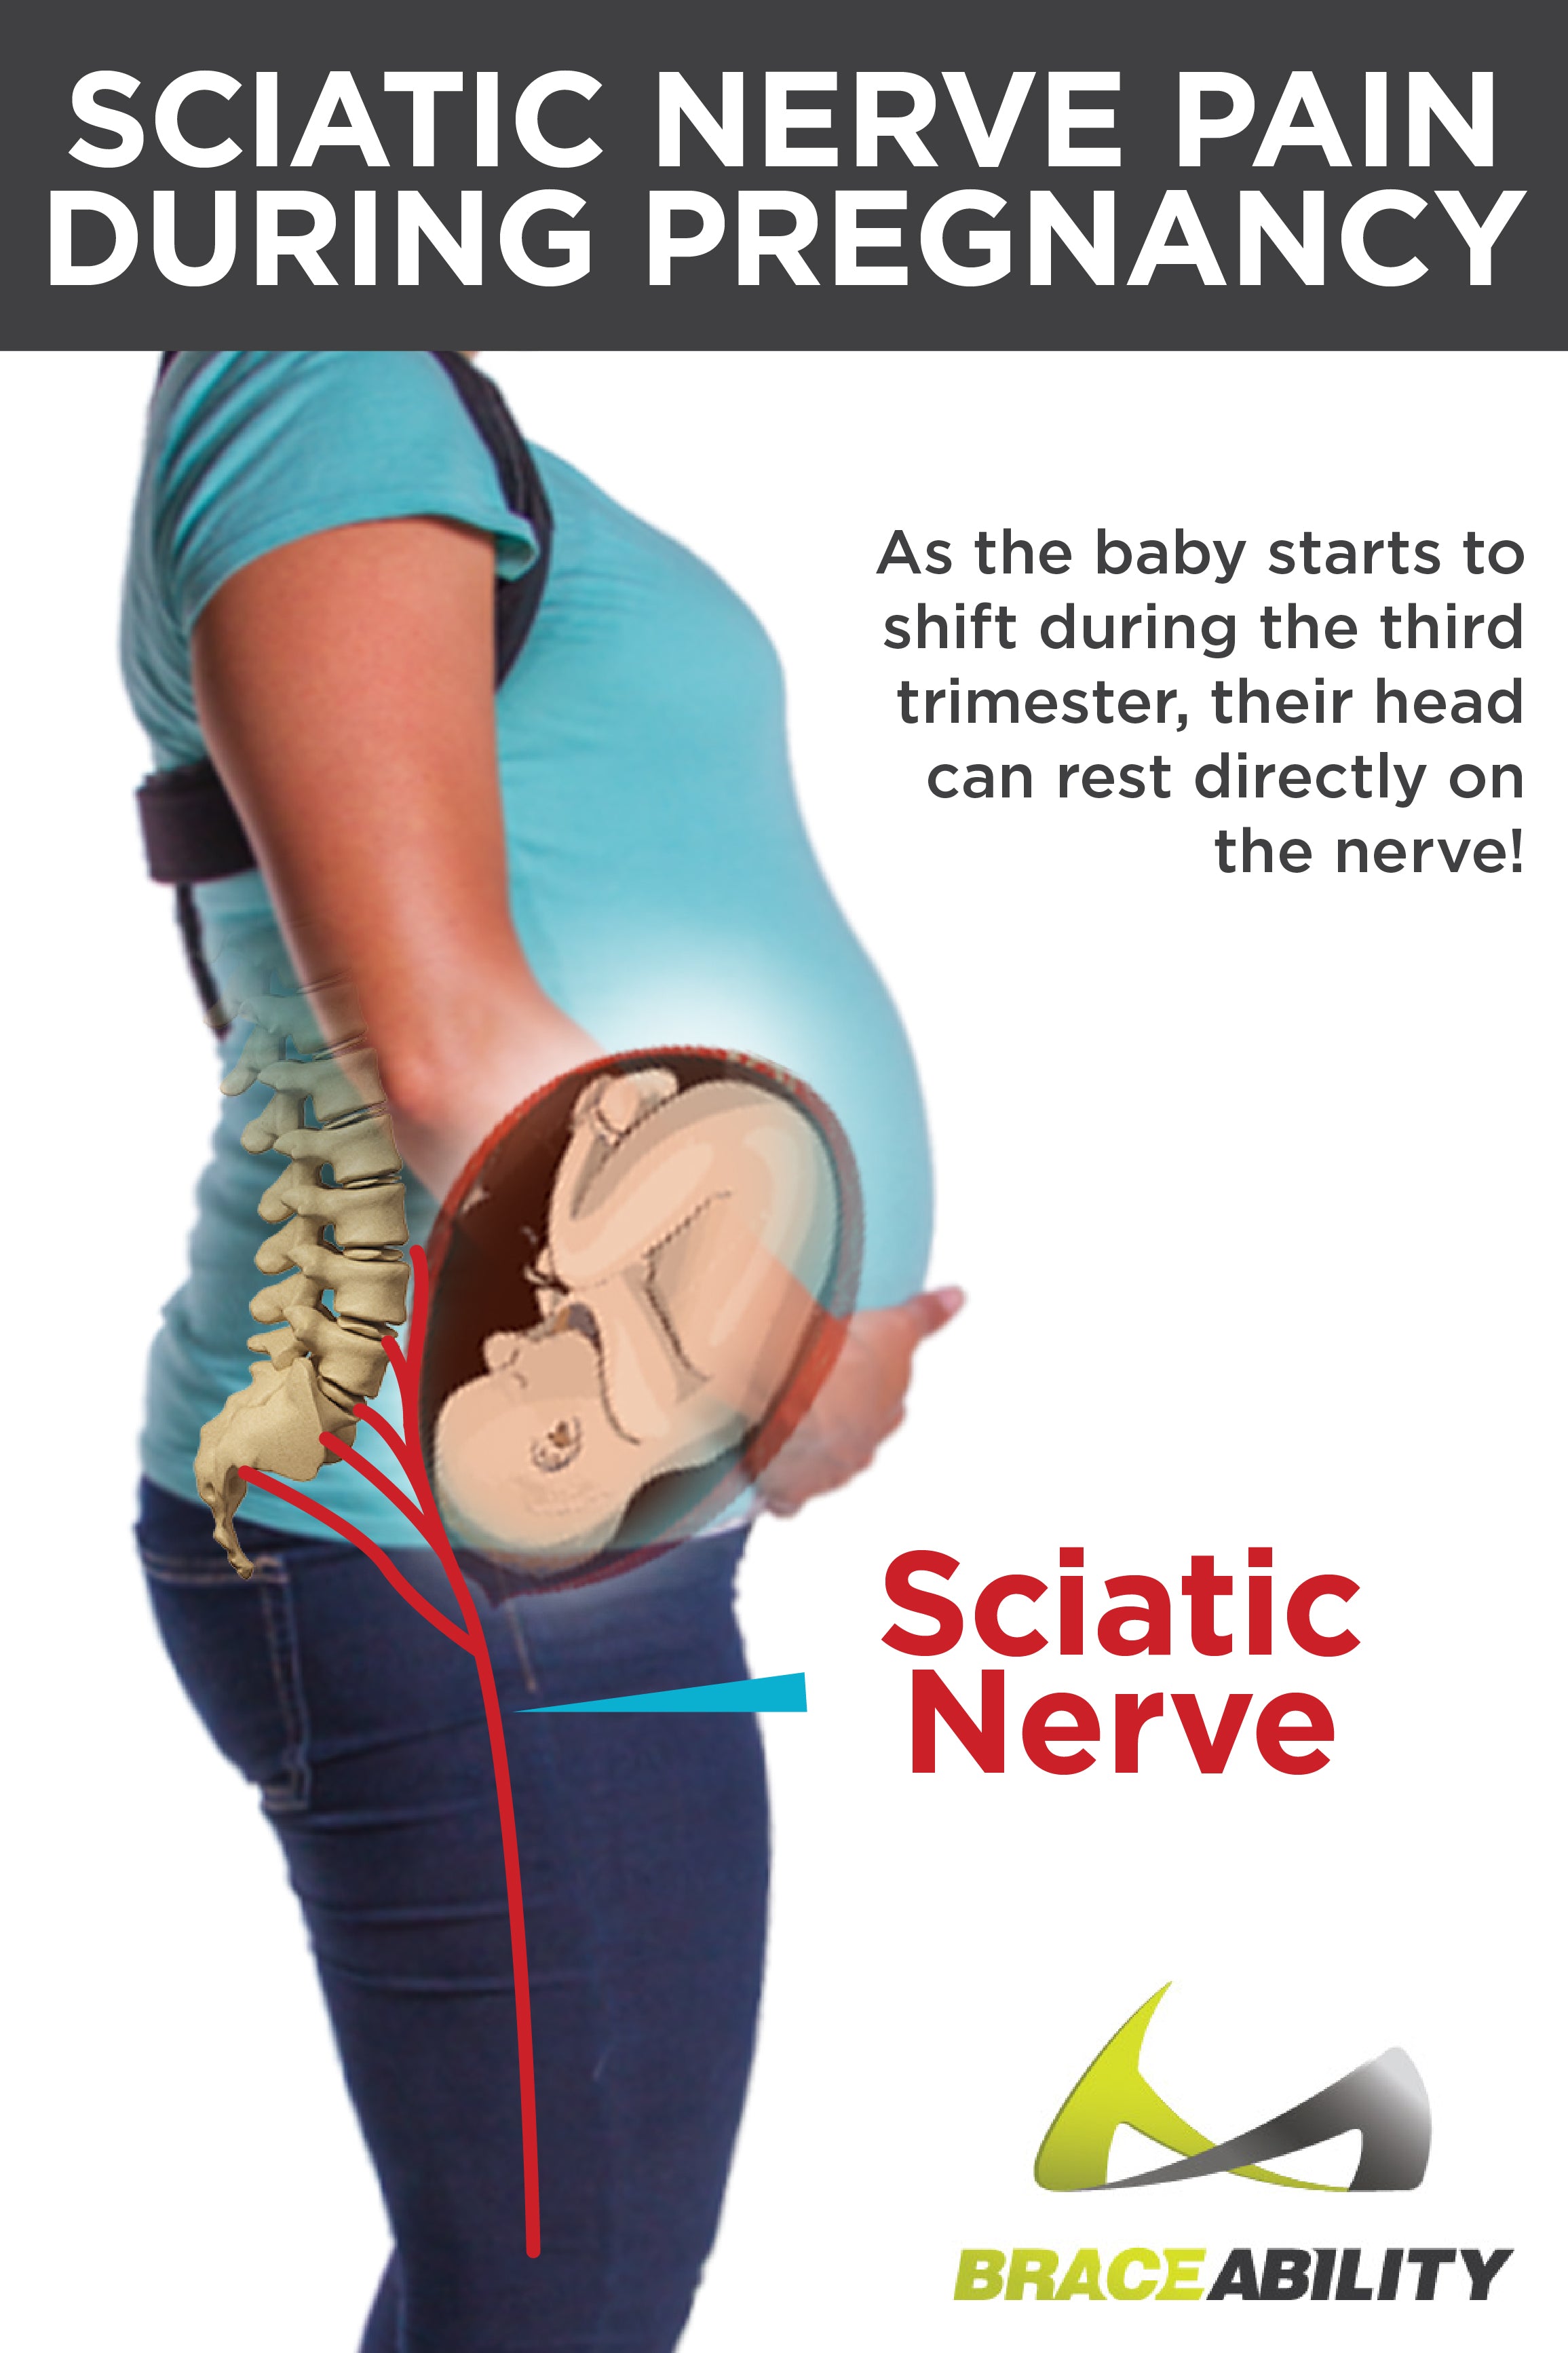 Sciatica pain during pregnancy happens when the baby is on your sciatic nerve